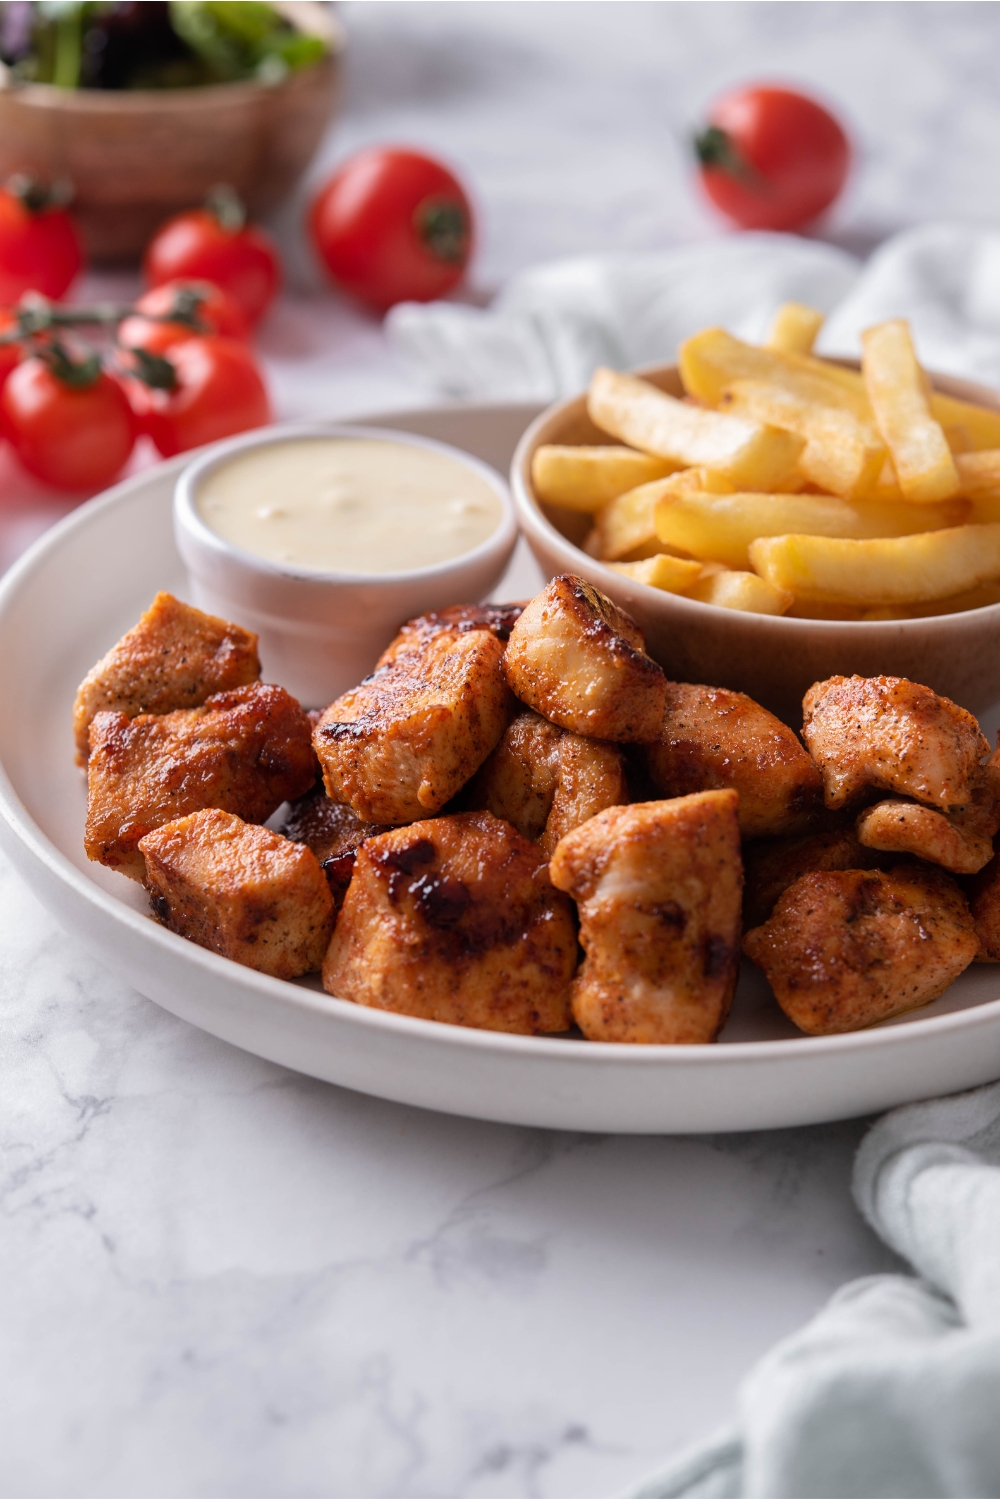 A pile of grilled chicken nuggets on a white plate with a side of french fries and a bowl of dipping sauce.